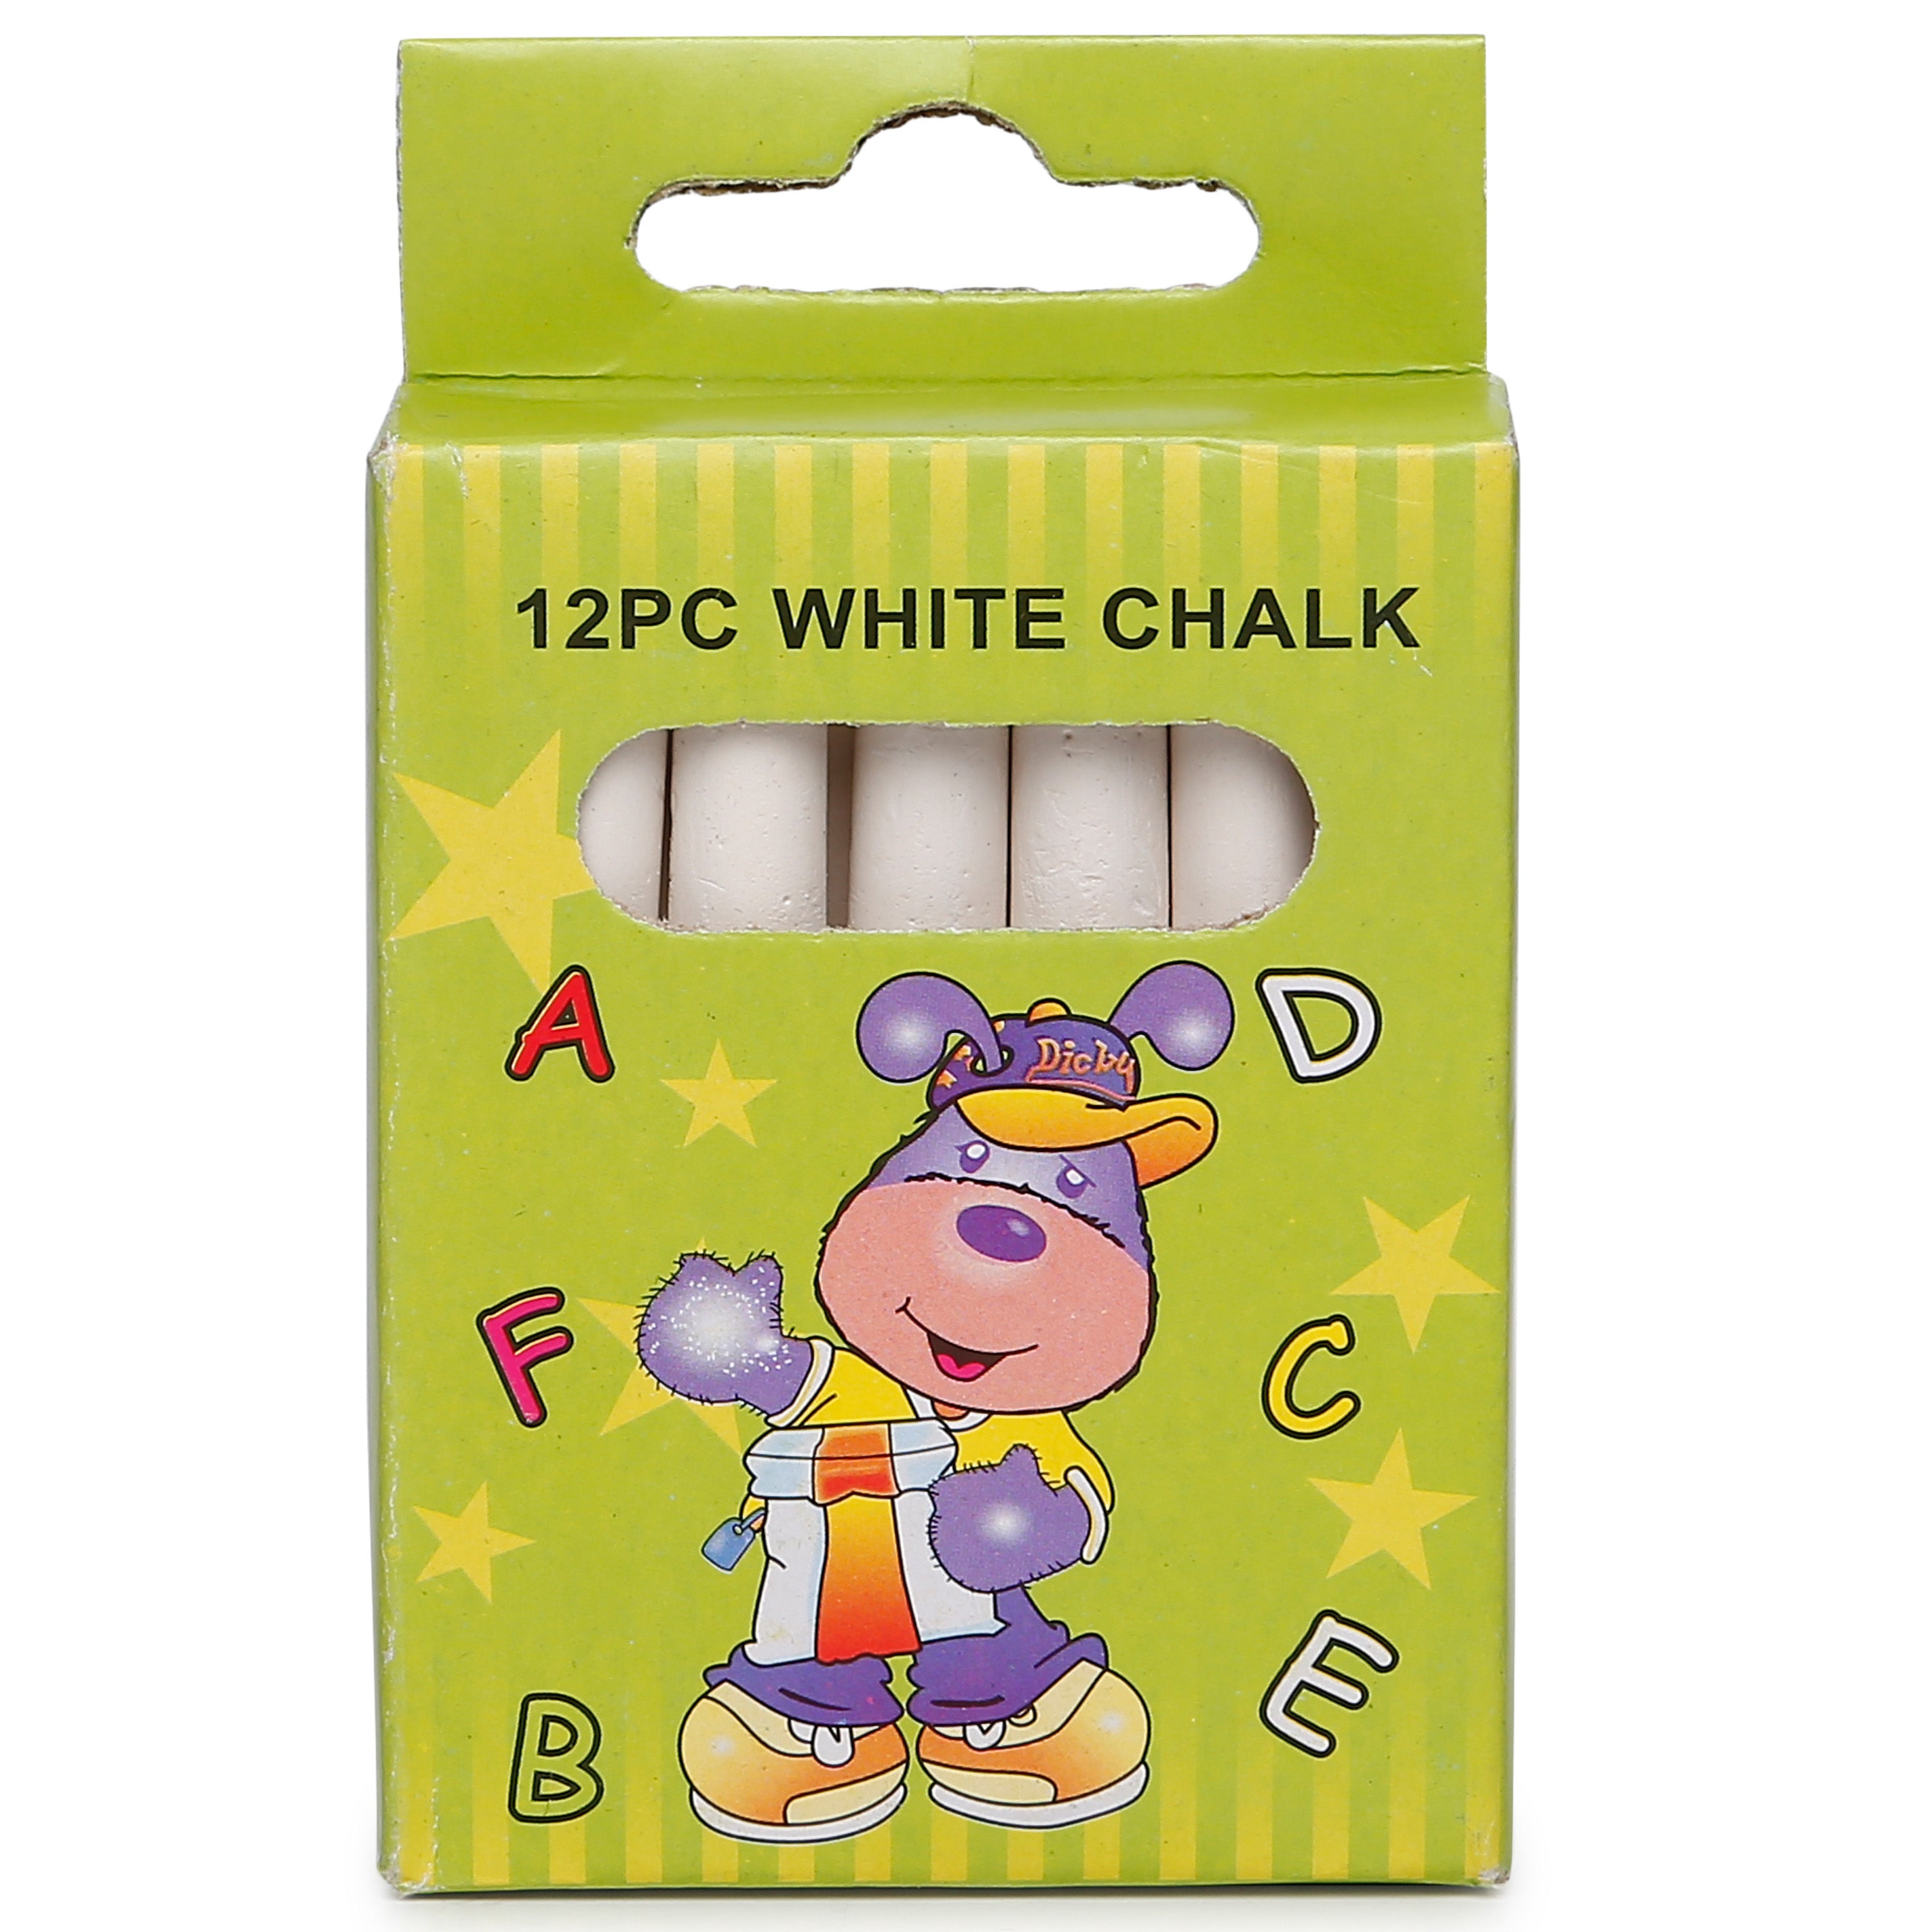 Doms Dustless White Chalk, Size: 5 Inch at Rs 23/box in Mumbai